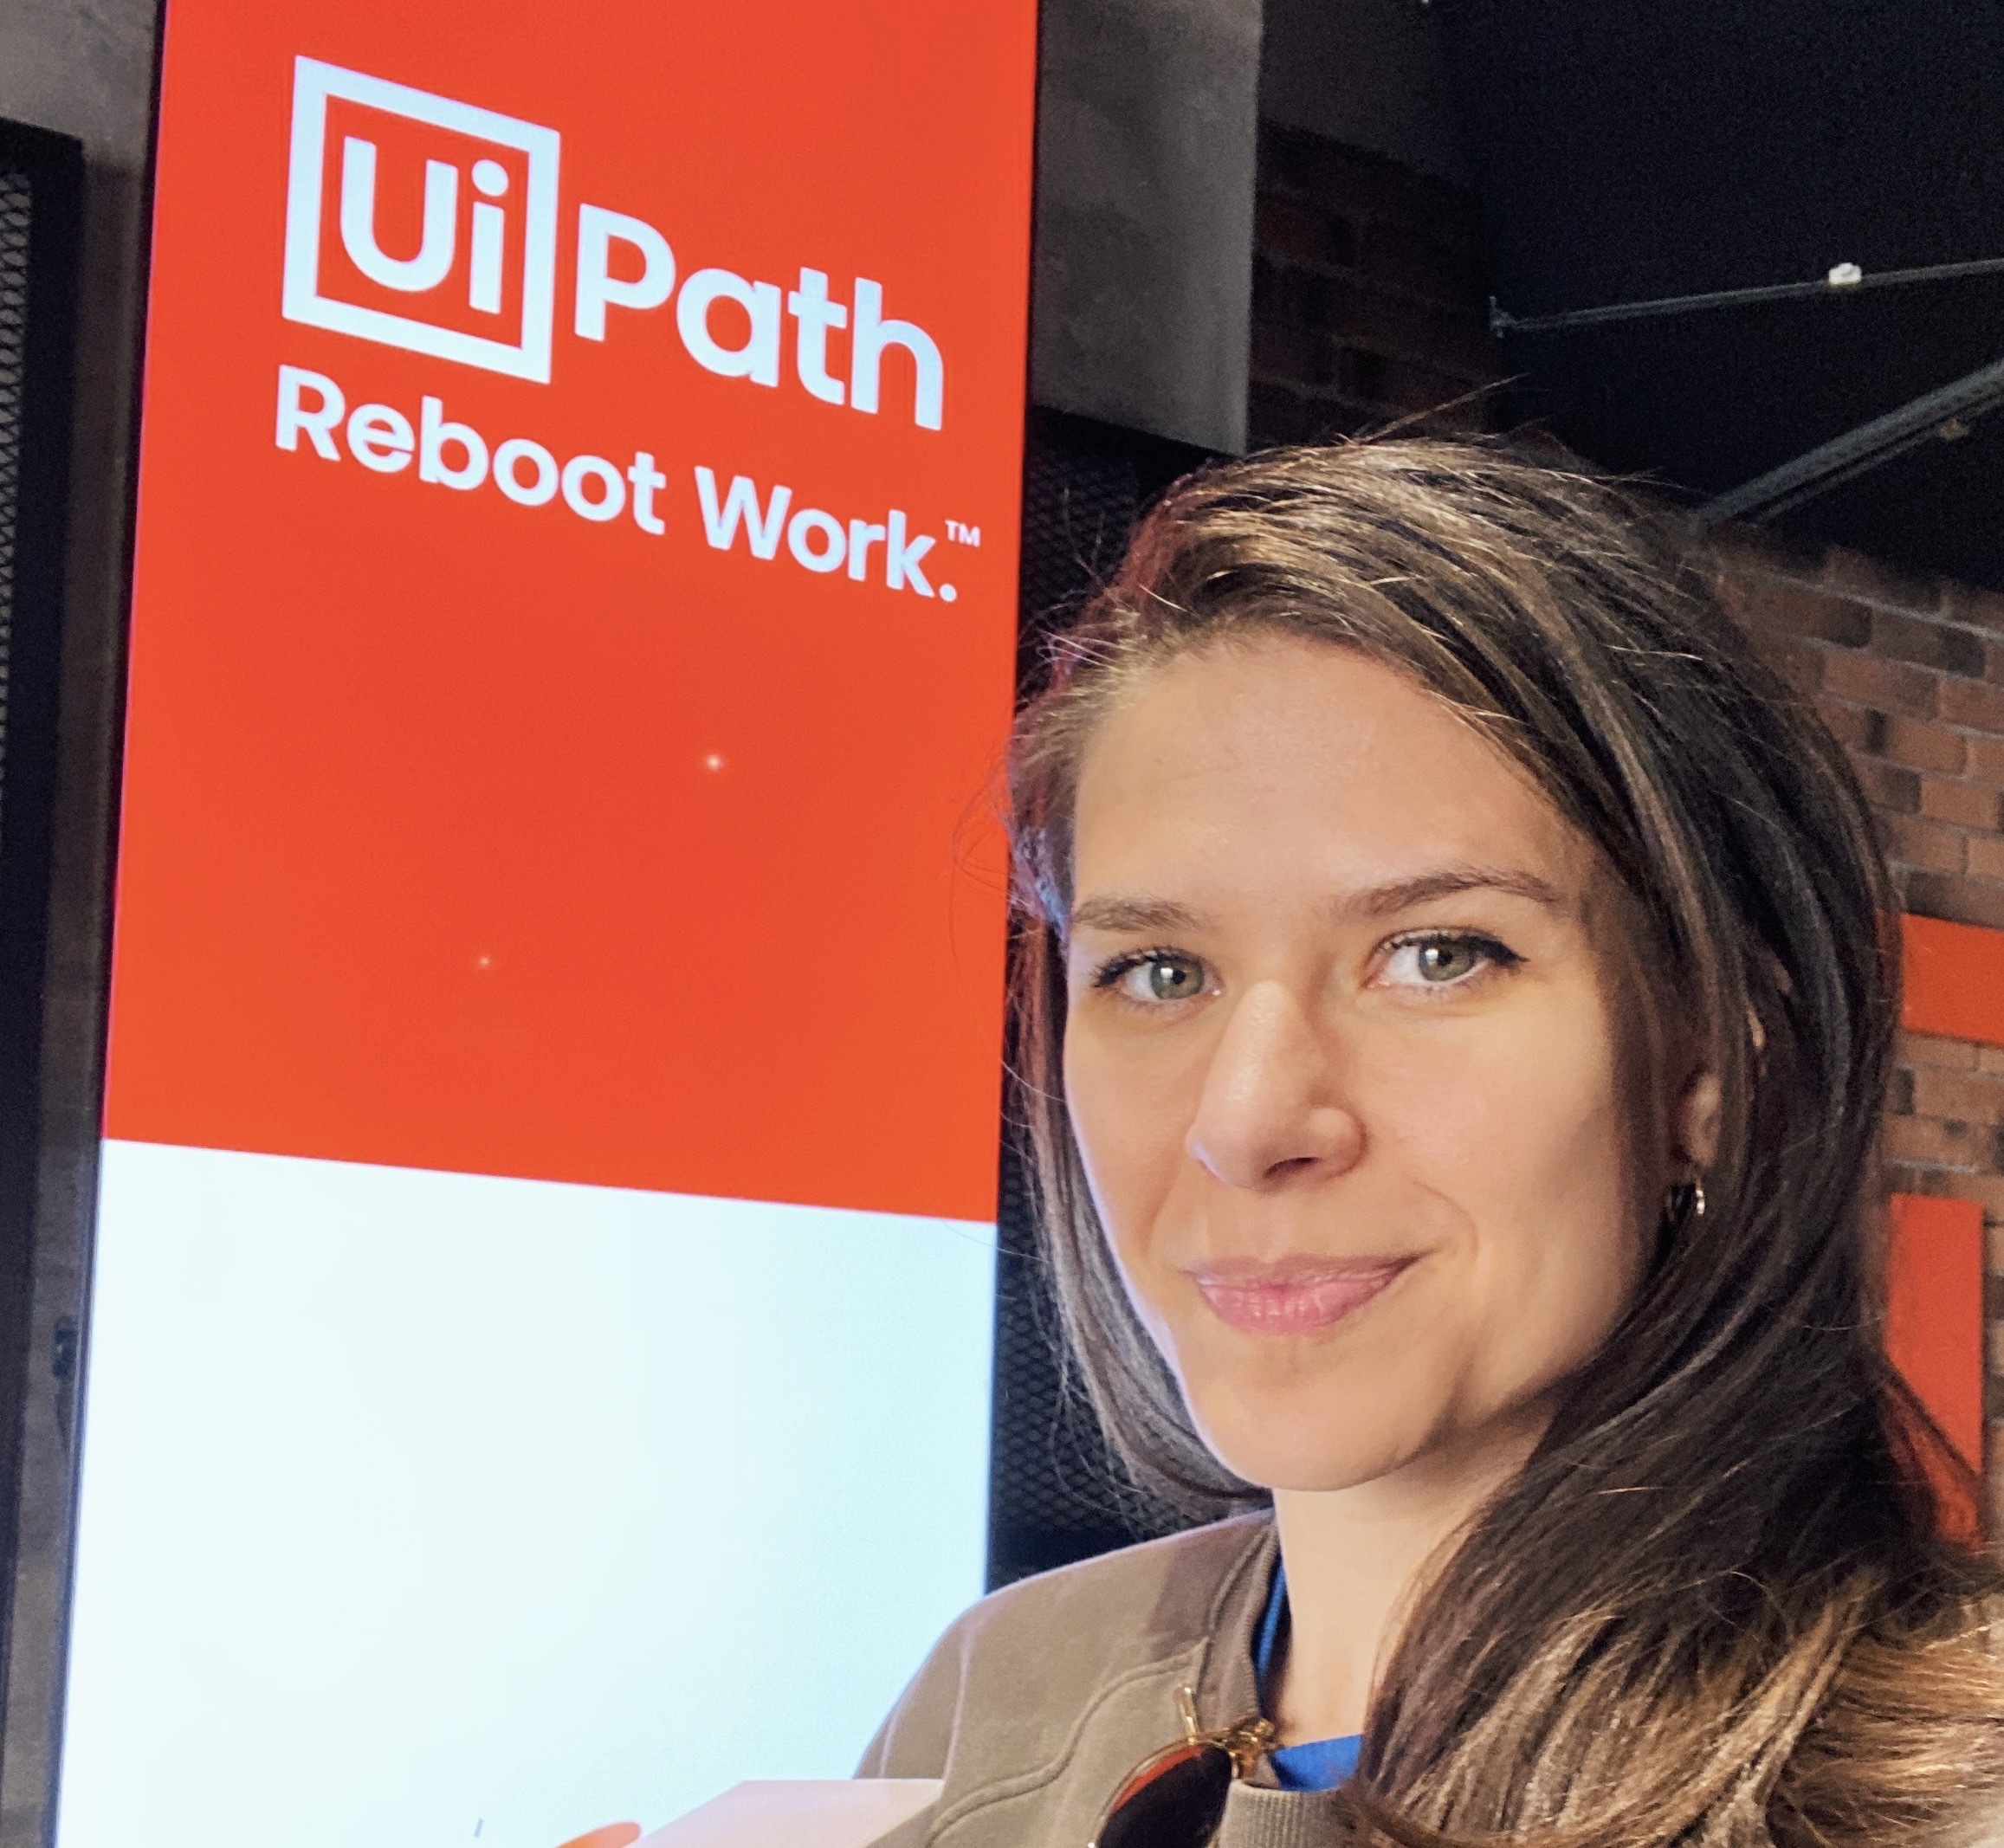 A selfie of Ioana Teleanu in front of a UiPath branded screen